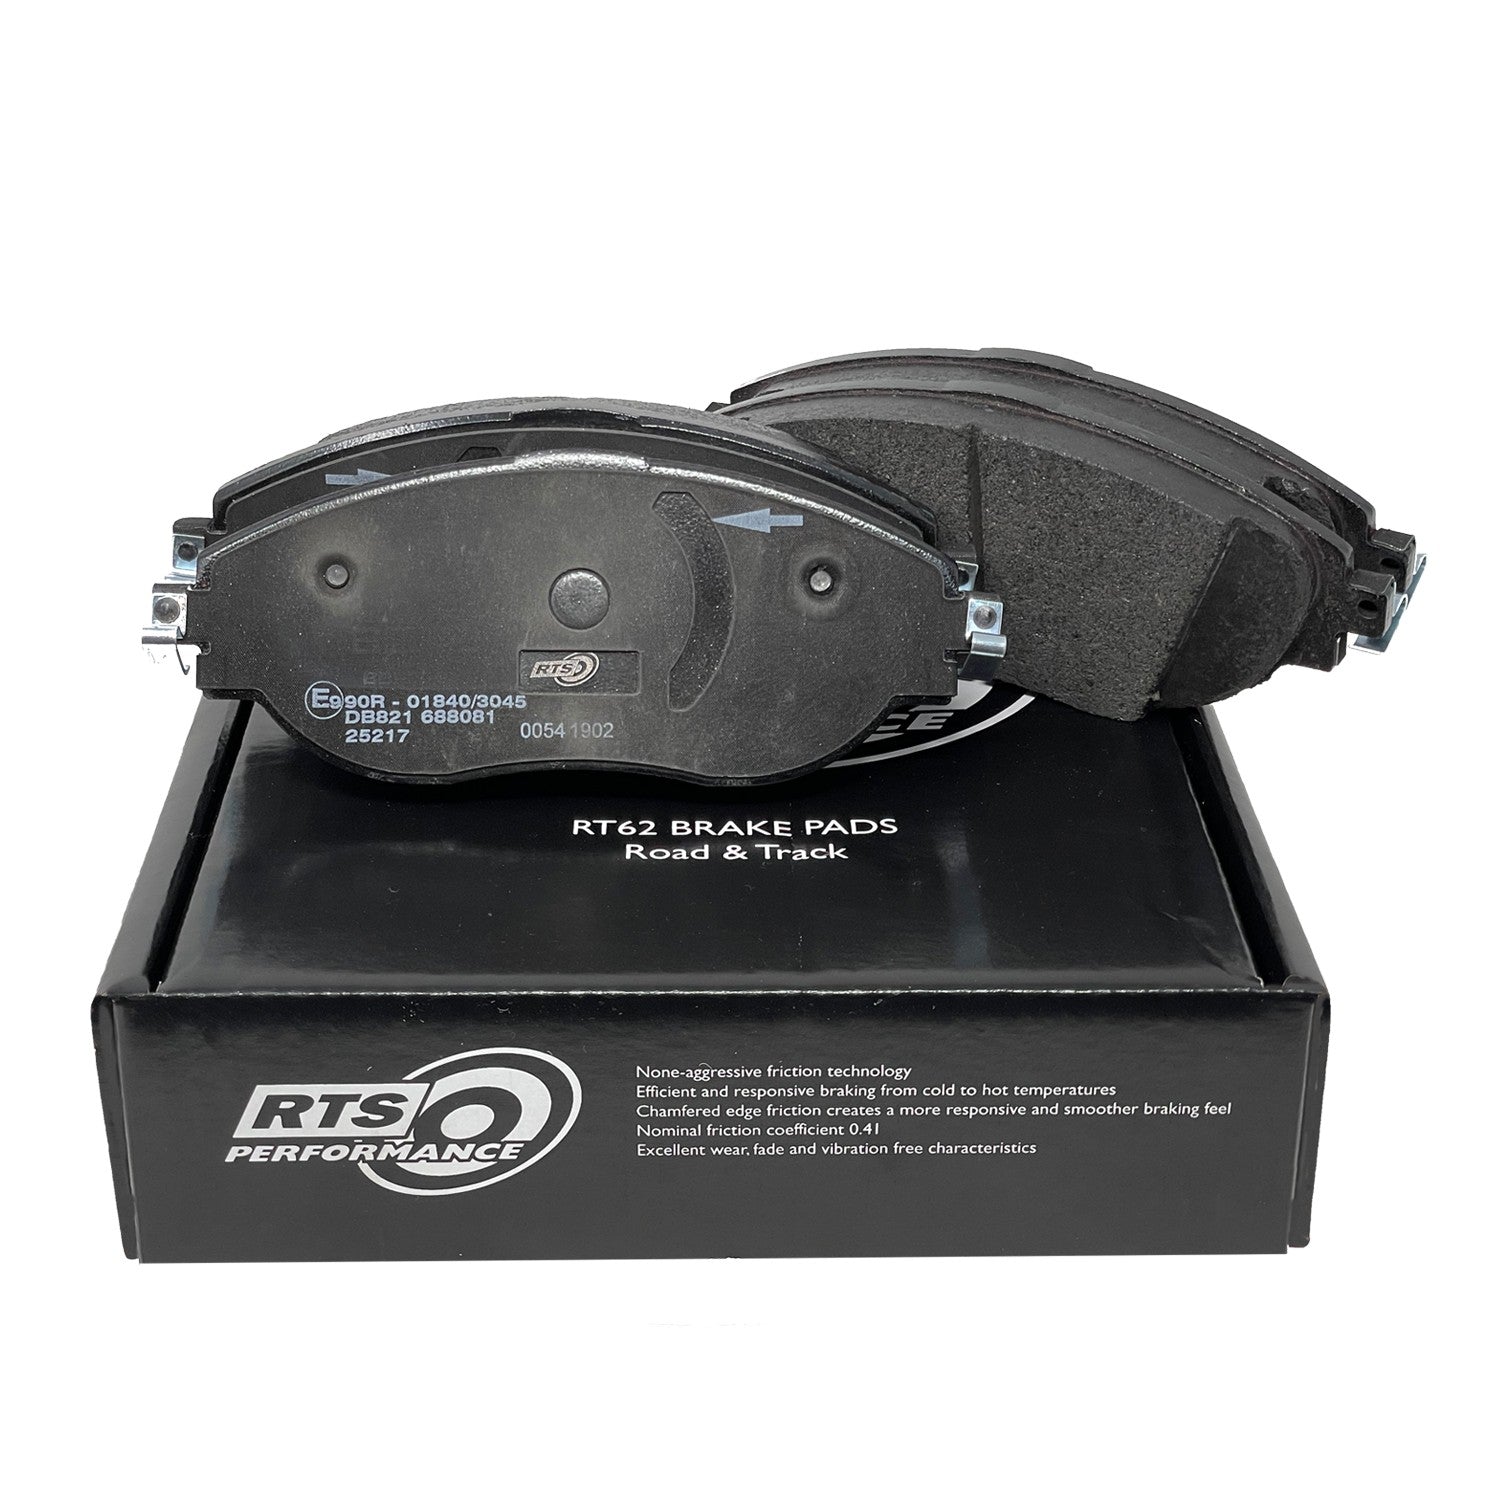 RTS Performance Brake Pads (RT62) – Ford Focus ST225 – Rear Fitment (RT62-7225R) - Wayside Performance 